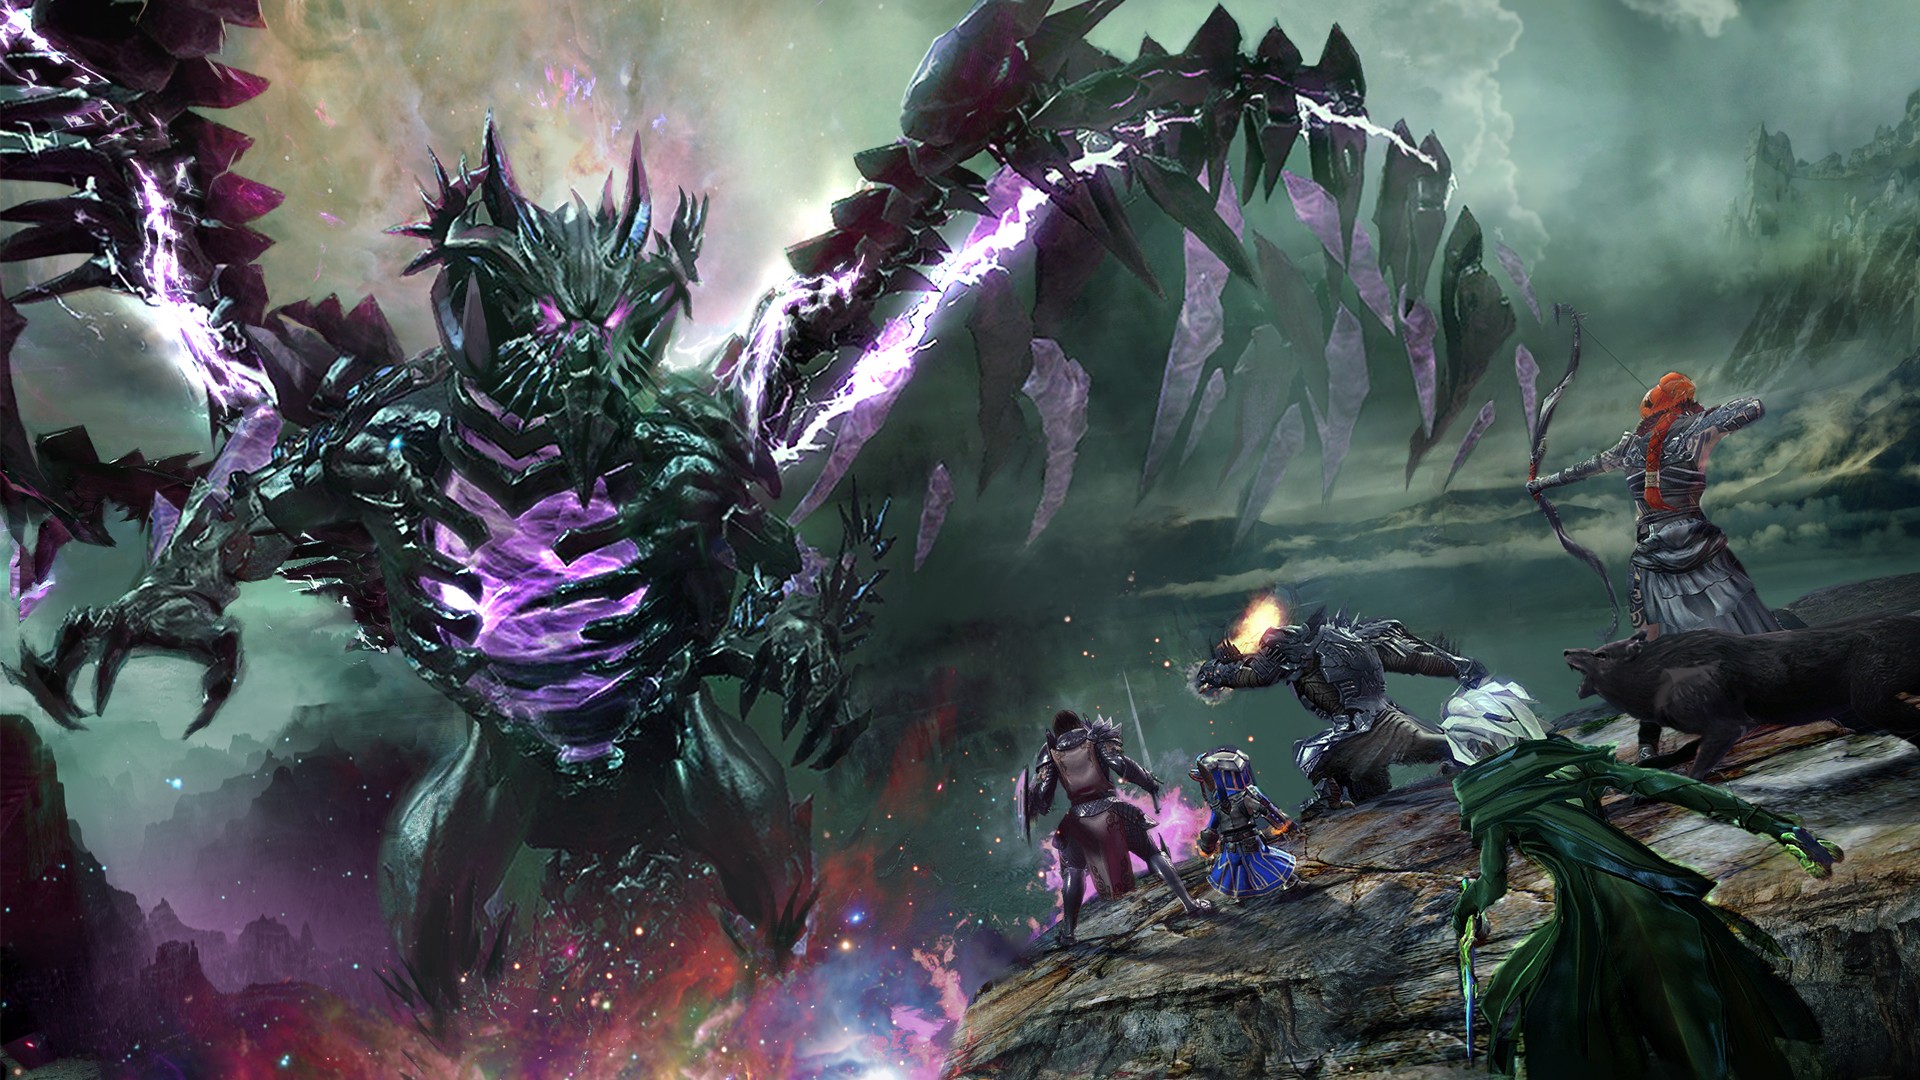 guild wars 2 wallpaper,action adventure game,pc game,cg artwork,strategy video game,adventure game